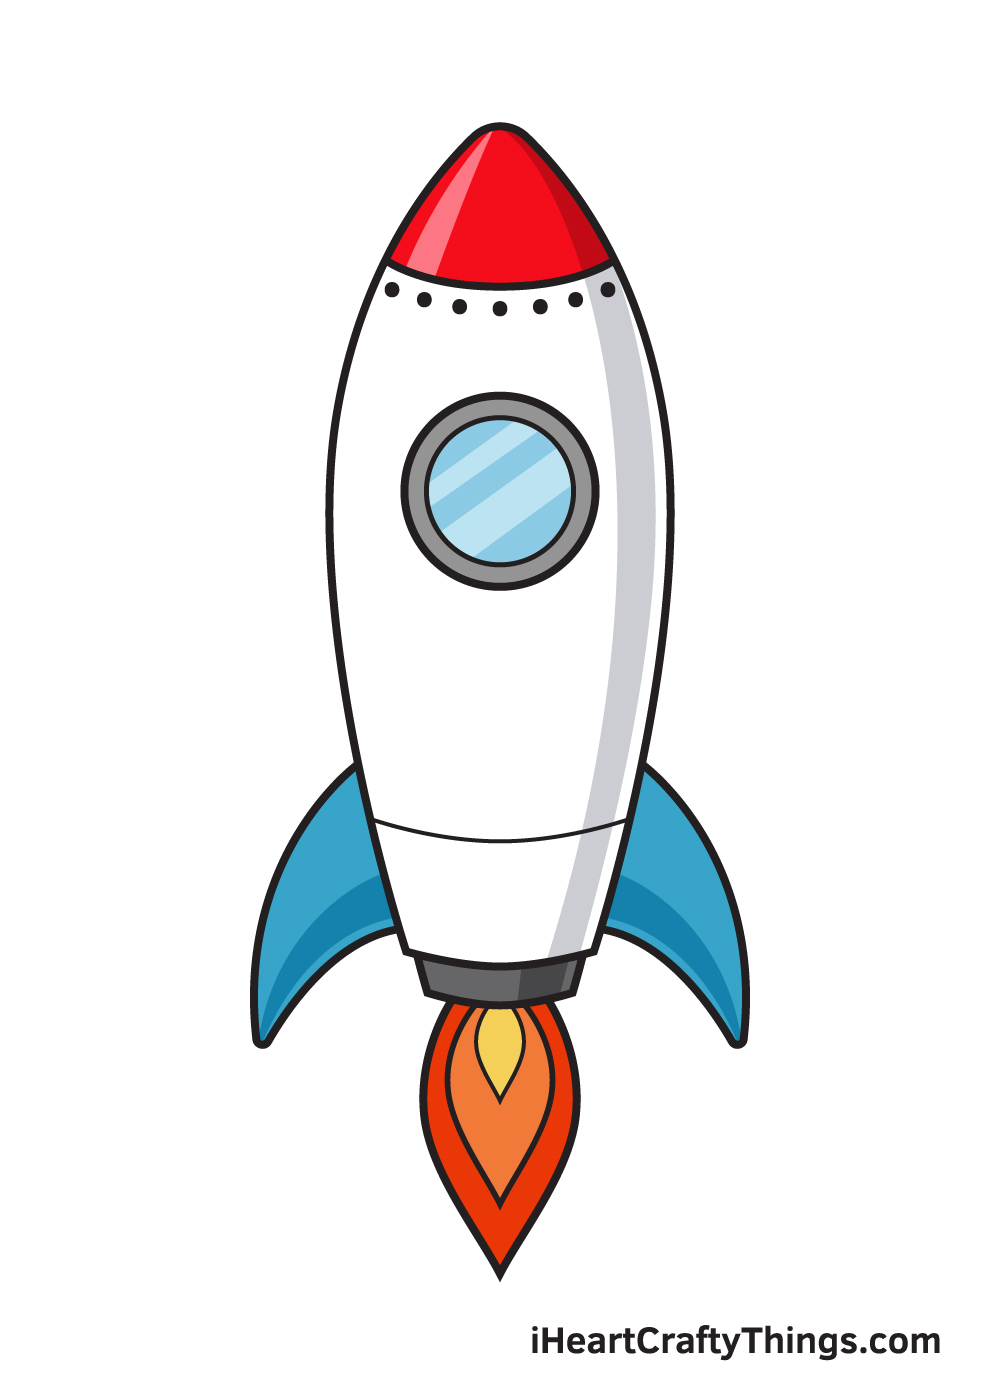  How To Draw A Rocket Step By Step  The ultimate guide 